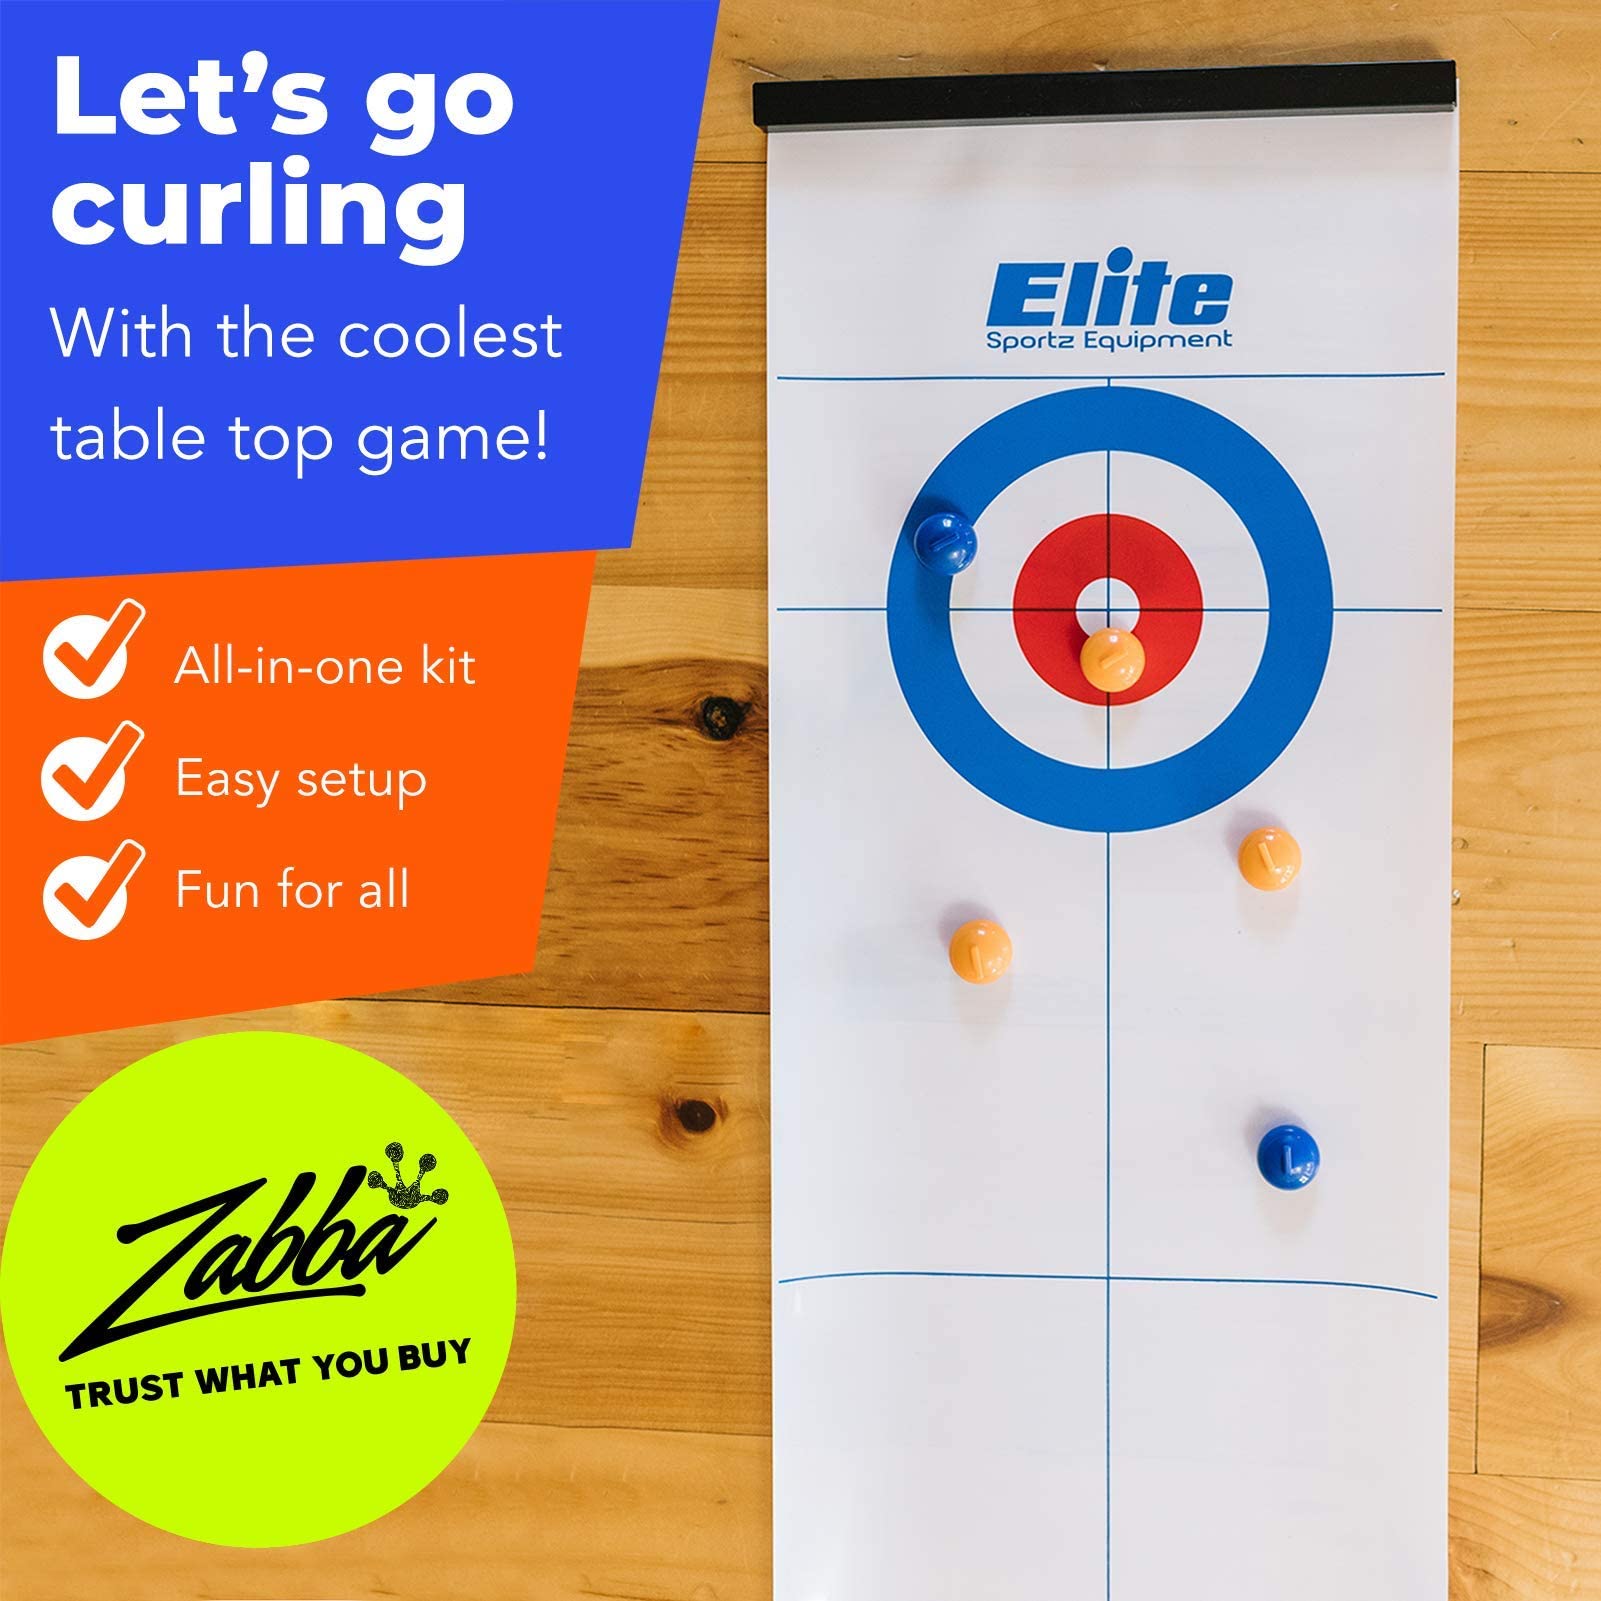 Elite Sportz Equipment Curling Game - Tabletop Games for Adults, Kids & Families - 4 Ft x 1 Ft Mat for Indoor Fun w/Bonus Travel Bag - Ages 6 & Up